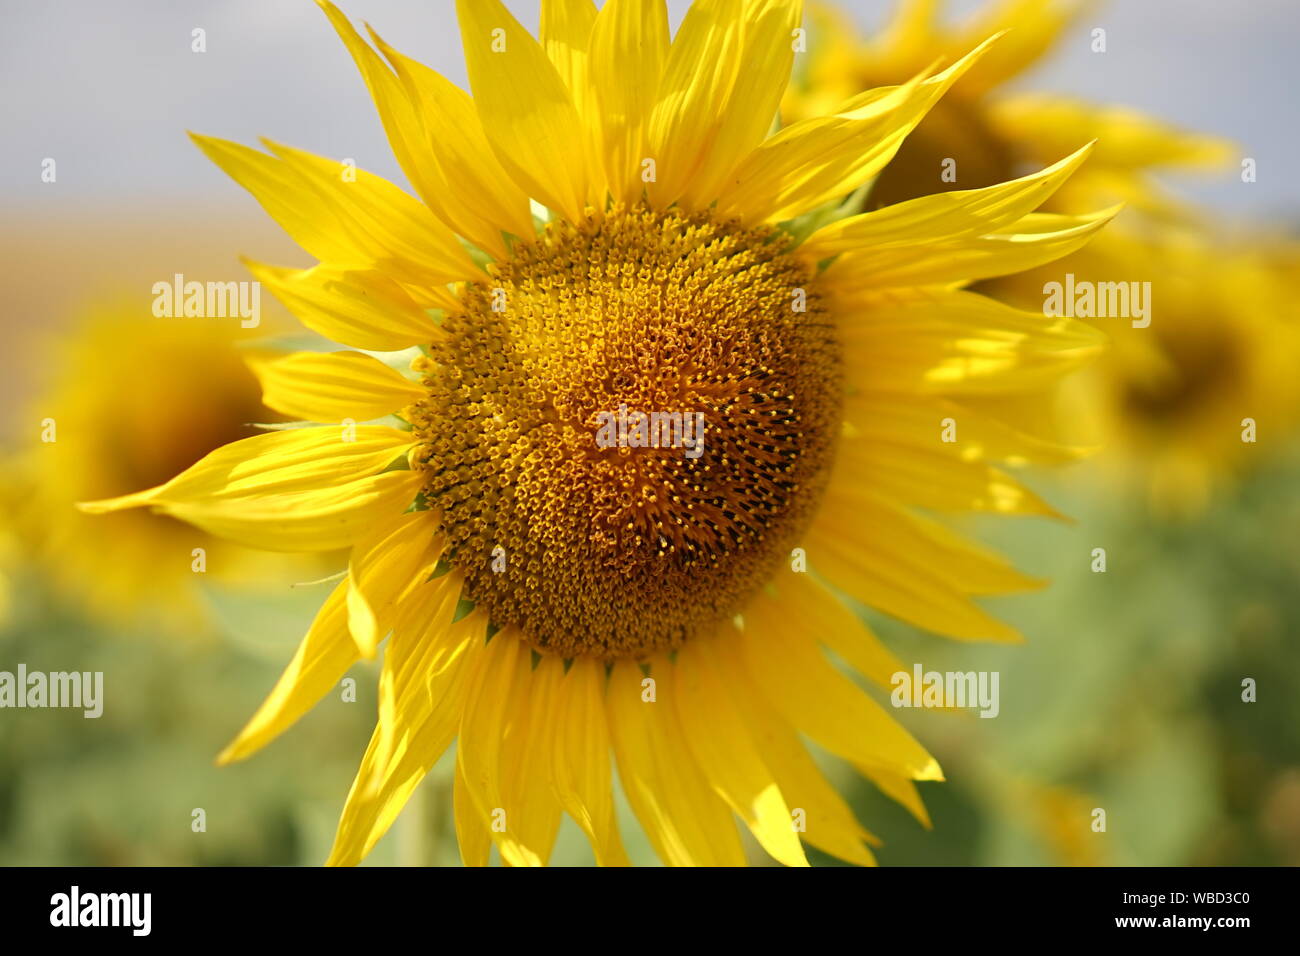 A singular sunflower head in a field of sunflowers in rural France Stock Photo